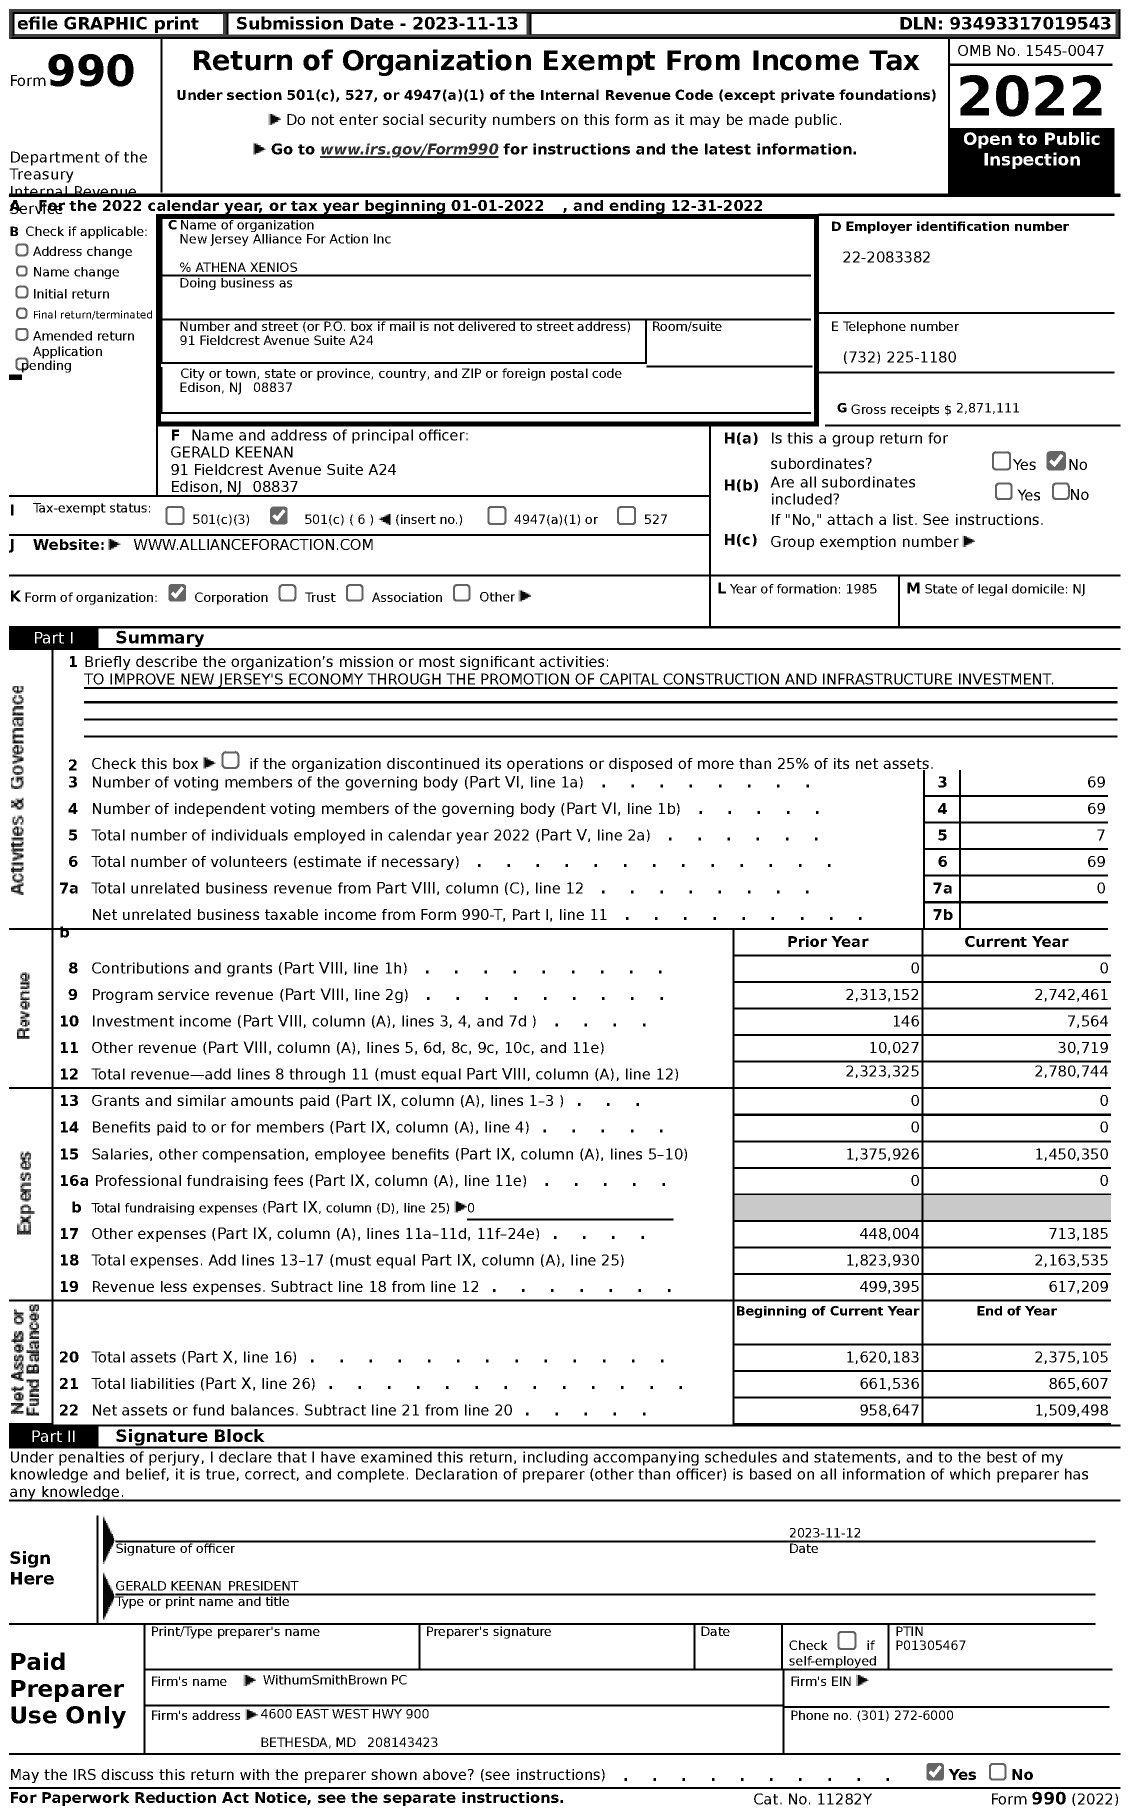 Image of first page of 2022 Form 990 for New Jersey Alliance For Action